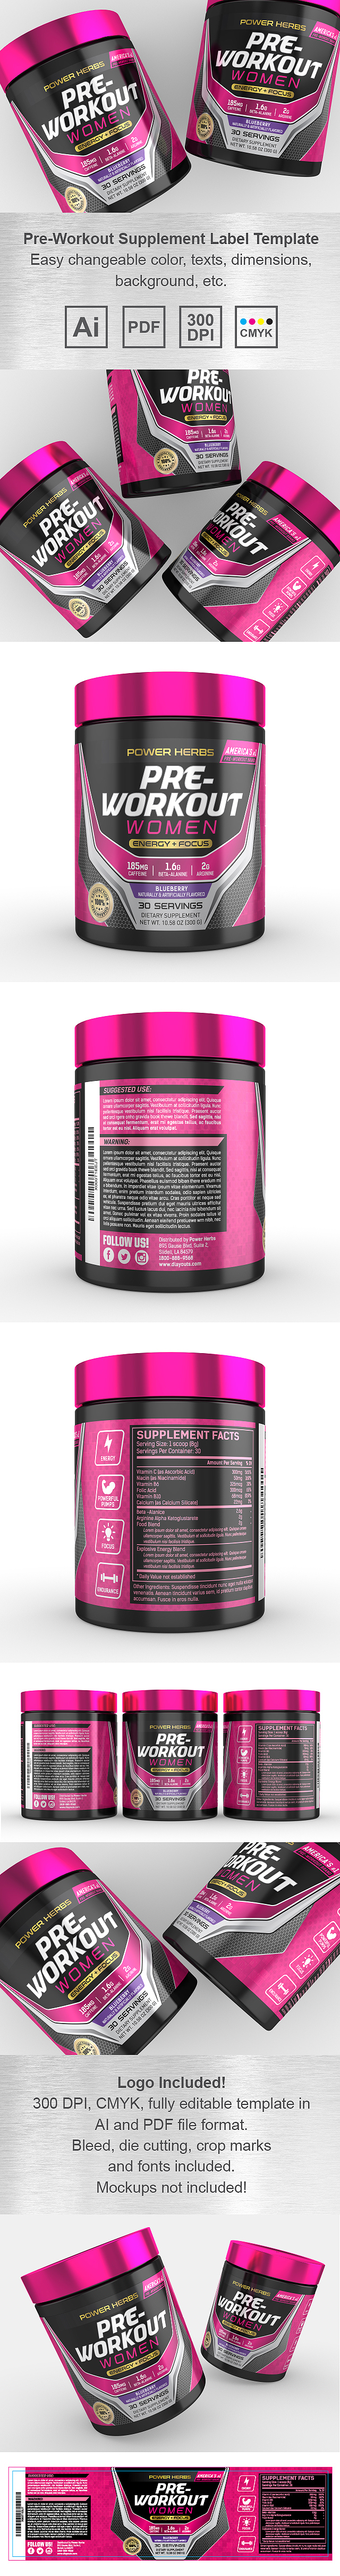 Pre Workout for Women Supplement Label Template